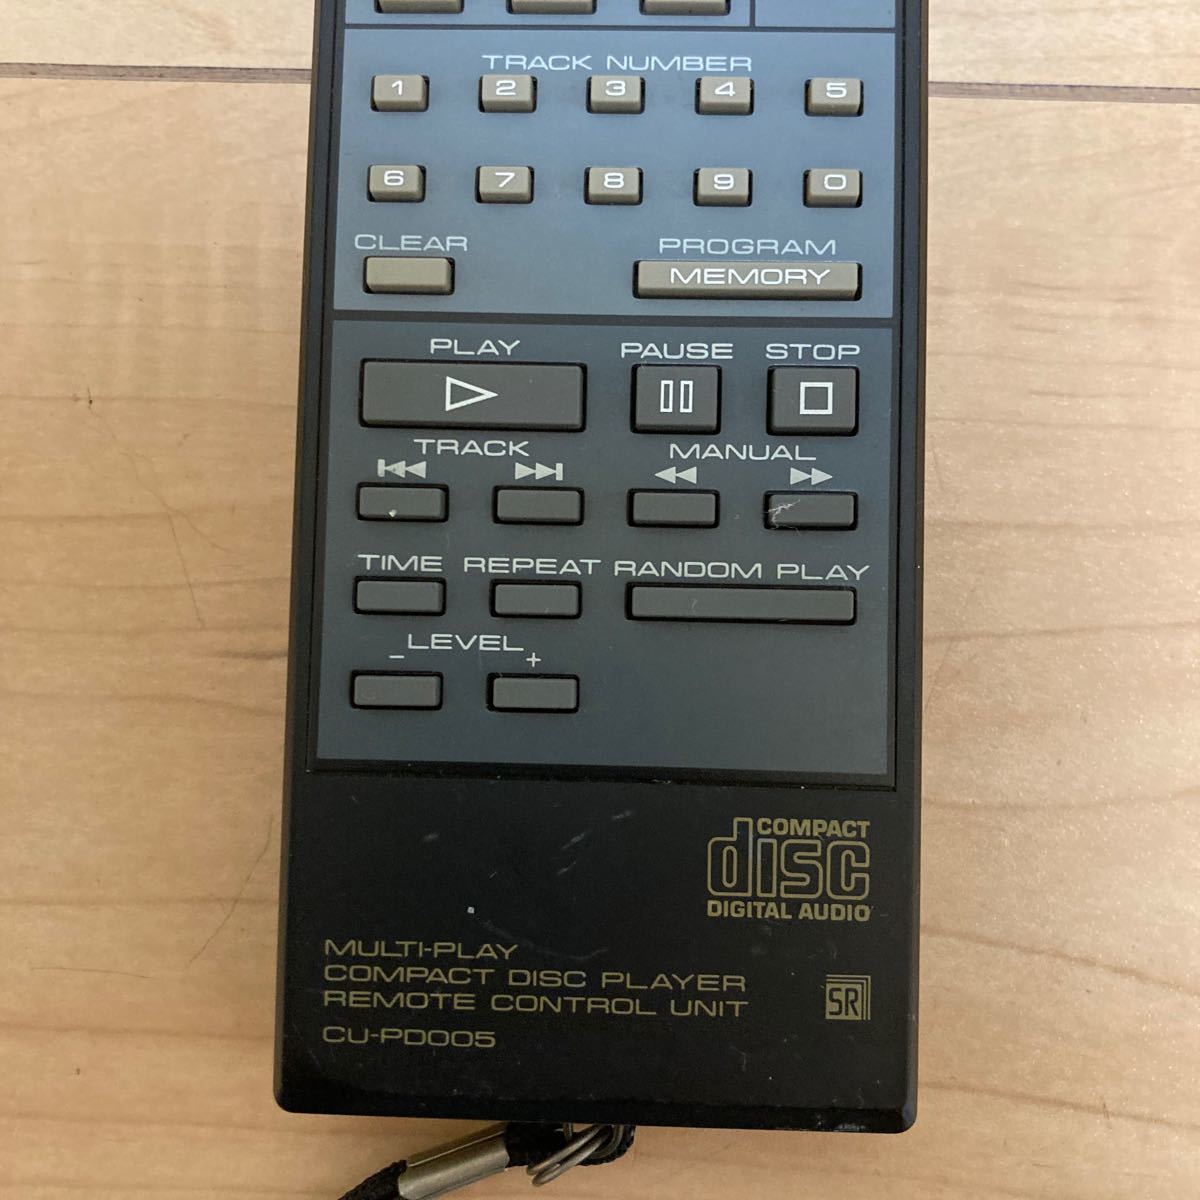  Pioneer Pioneer CU-PD005 PD-M70 for remote control 